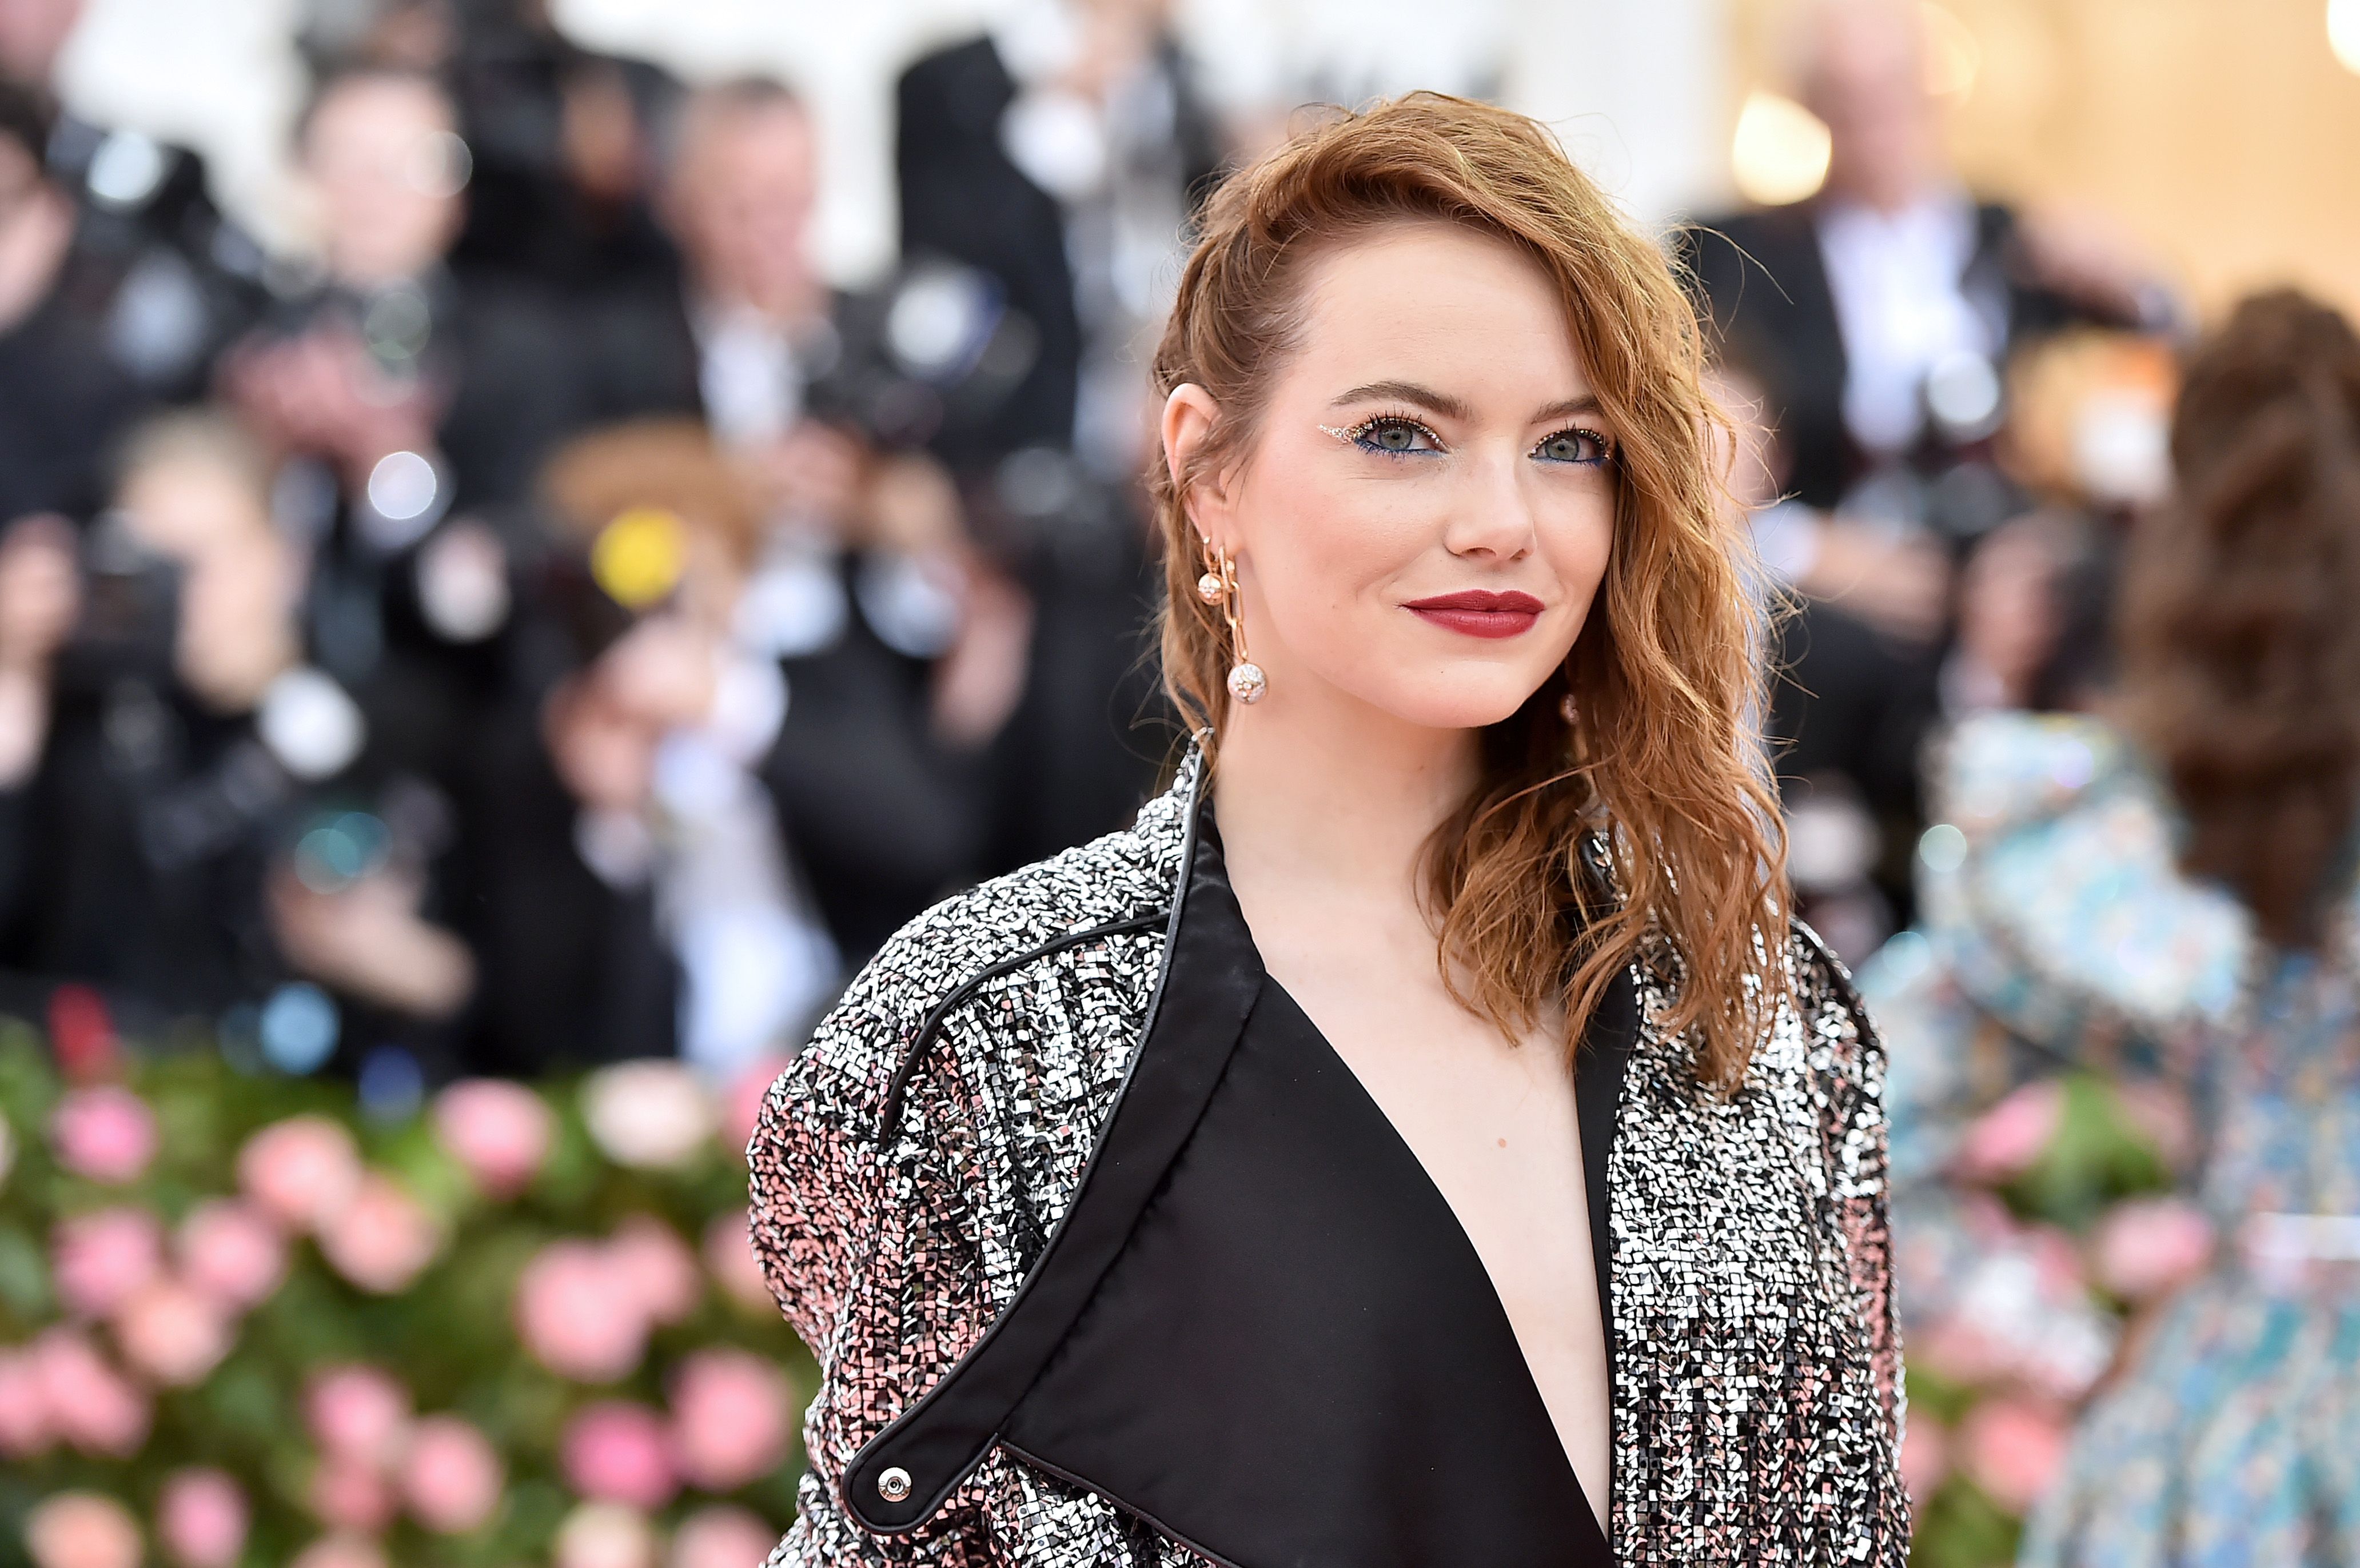 Emma Stone stepped out in style at the Cruella premiere, in a